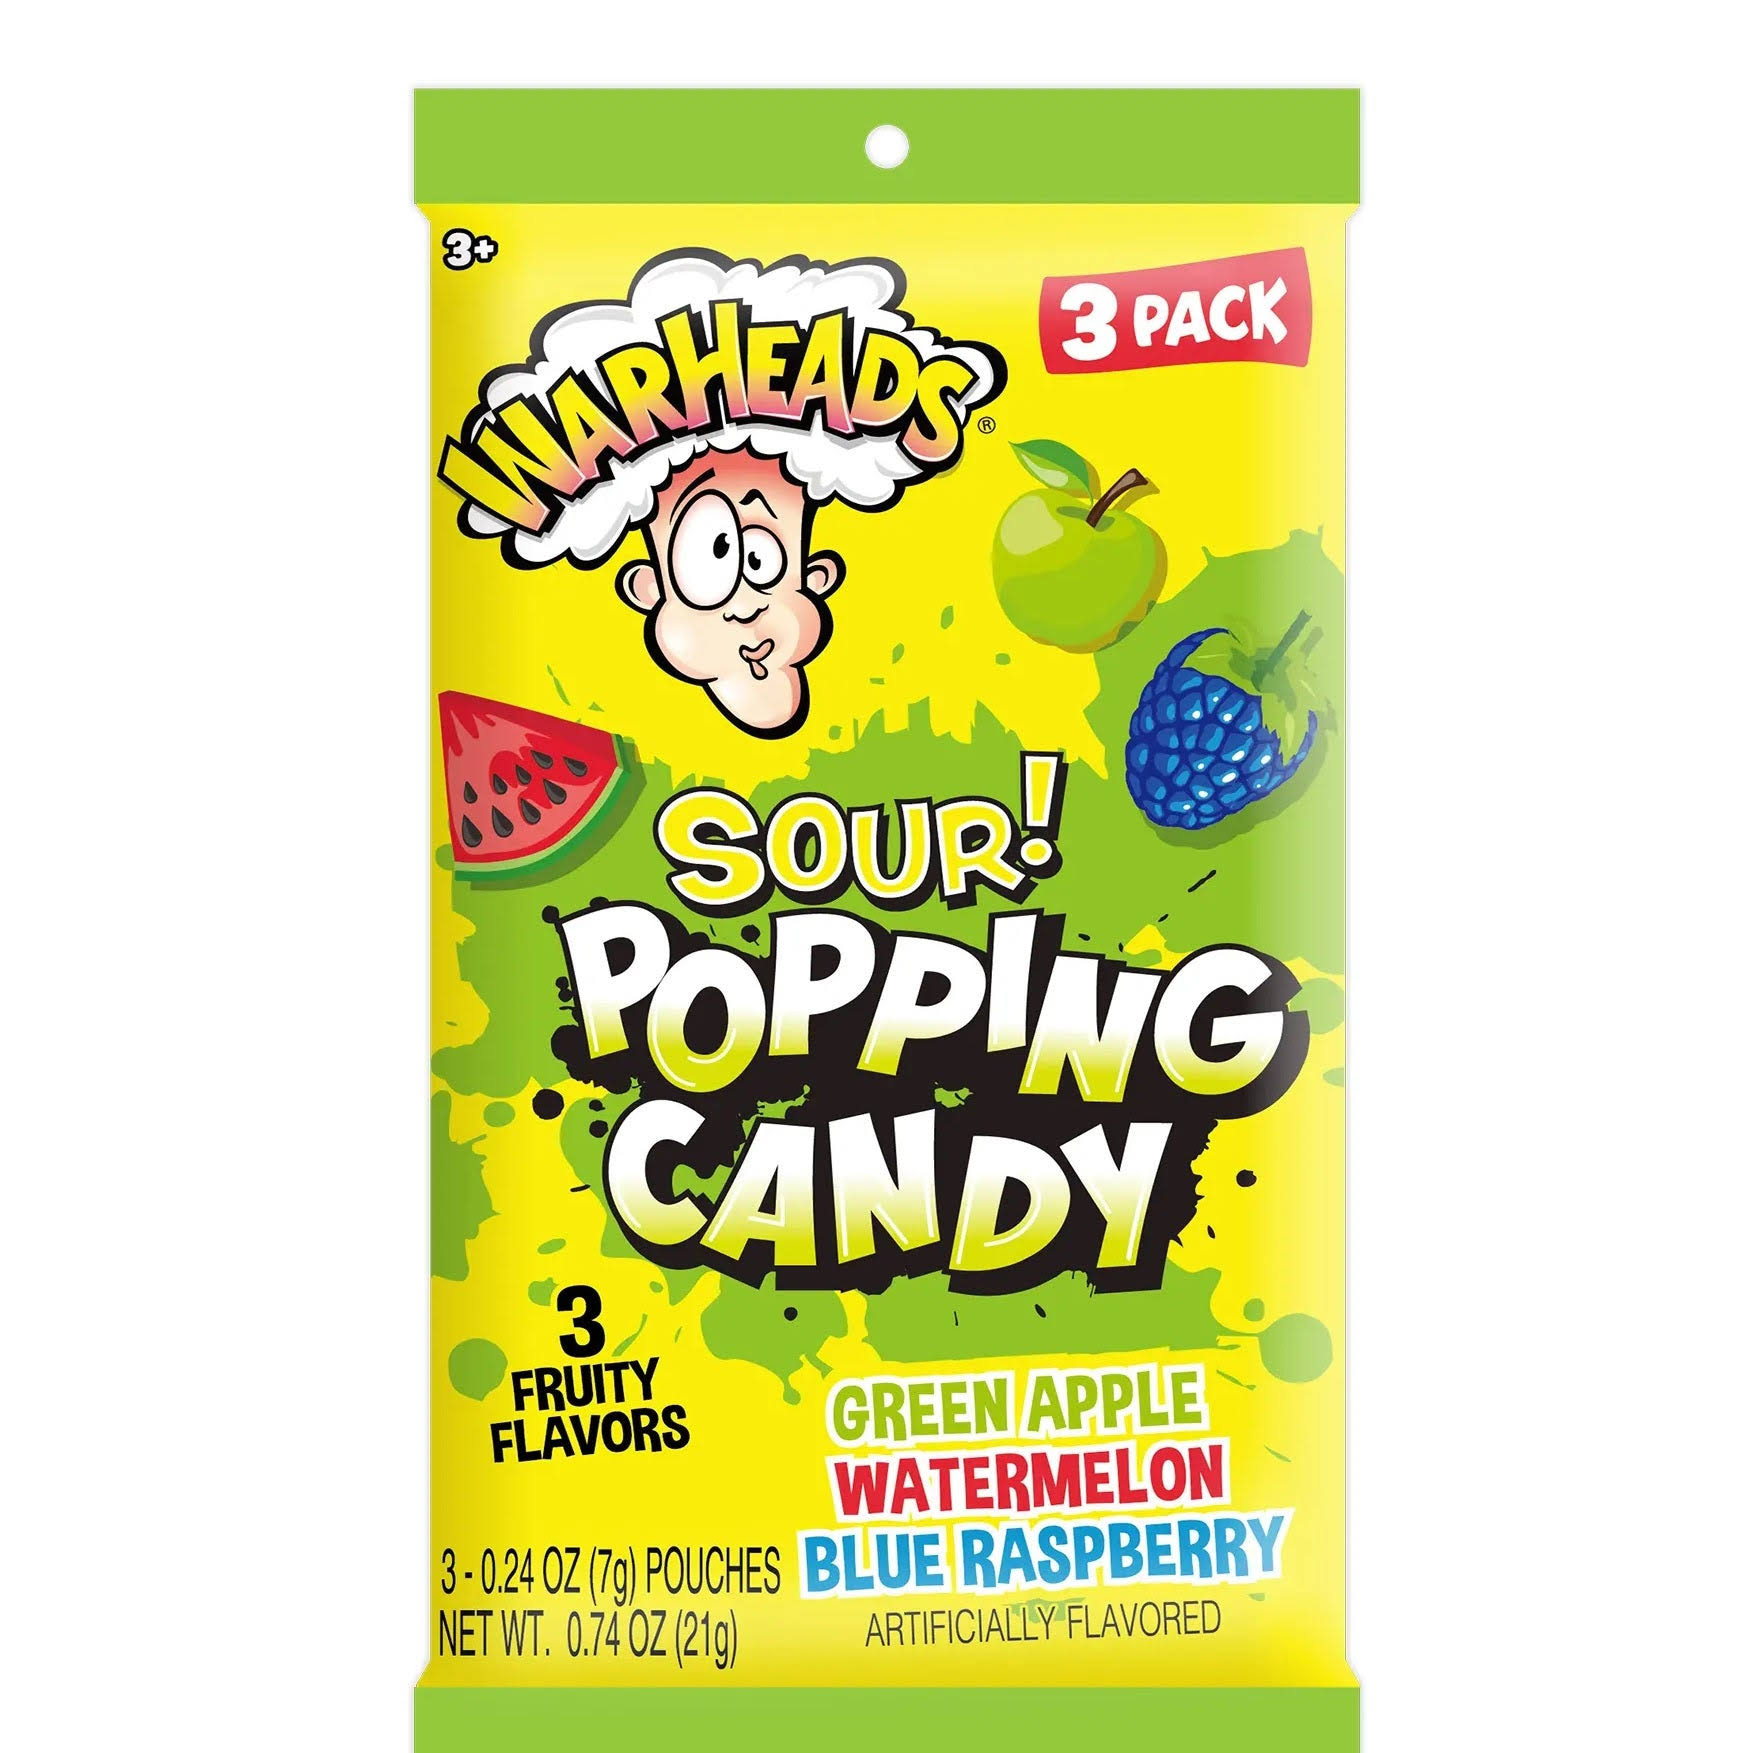 3 x Warheads Sour Popping Candy 3 Pack 21g Bag